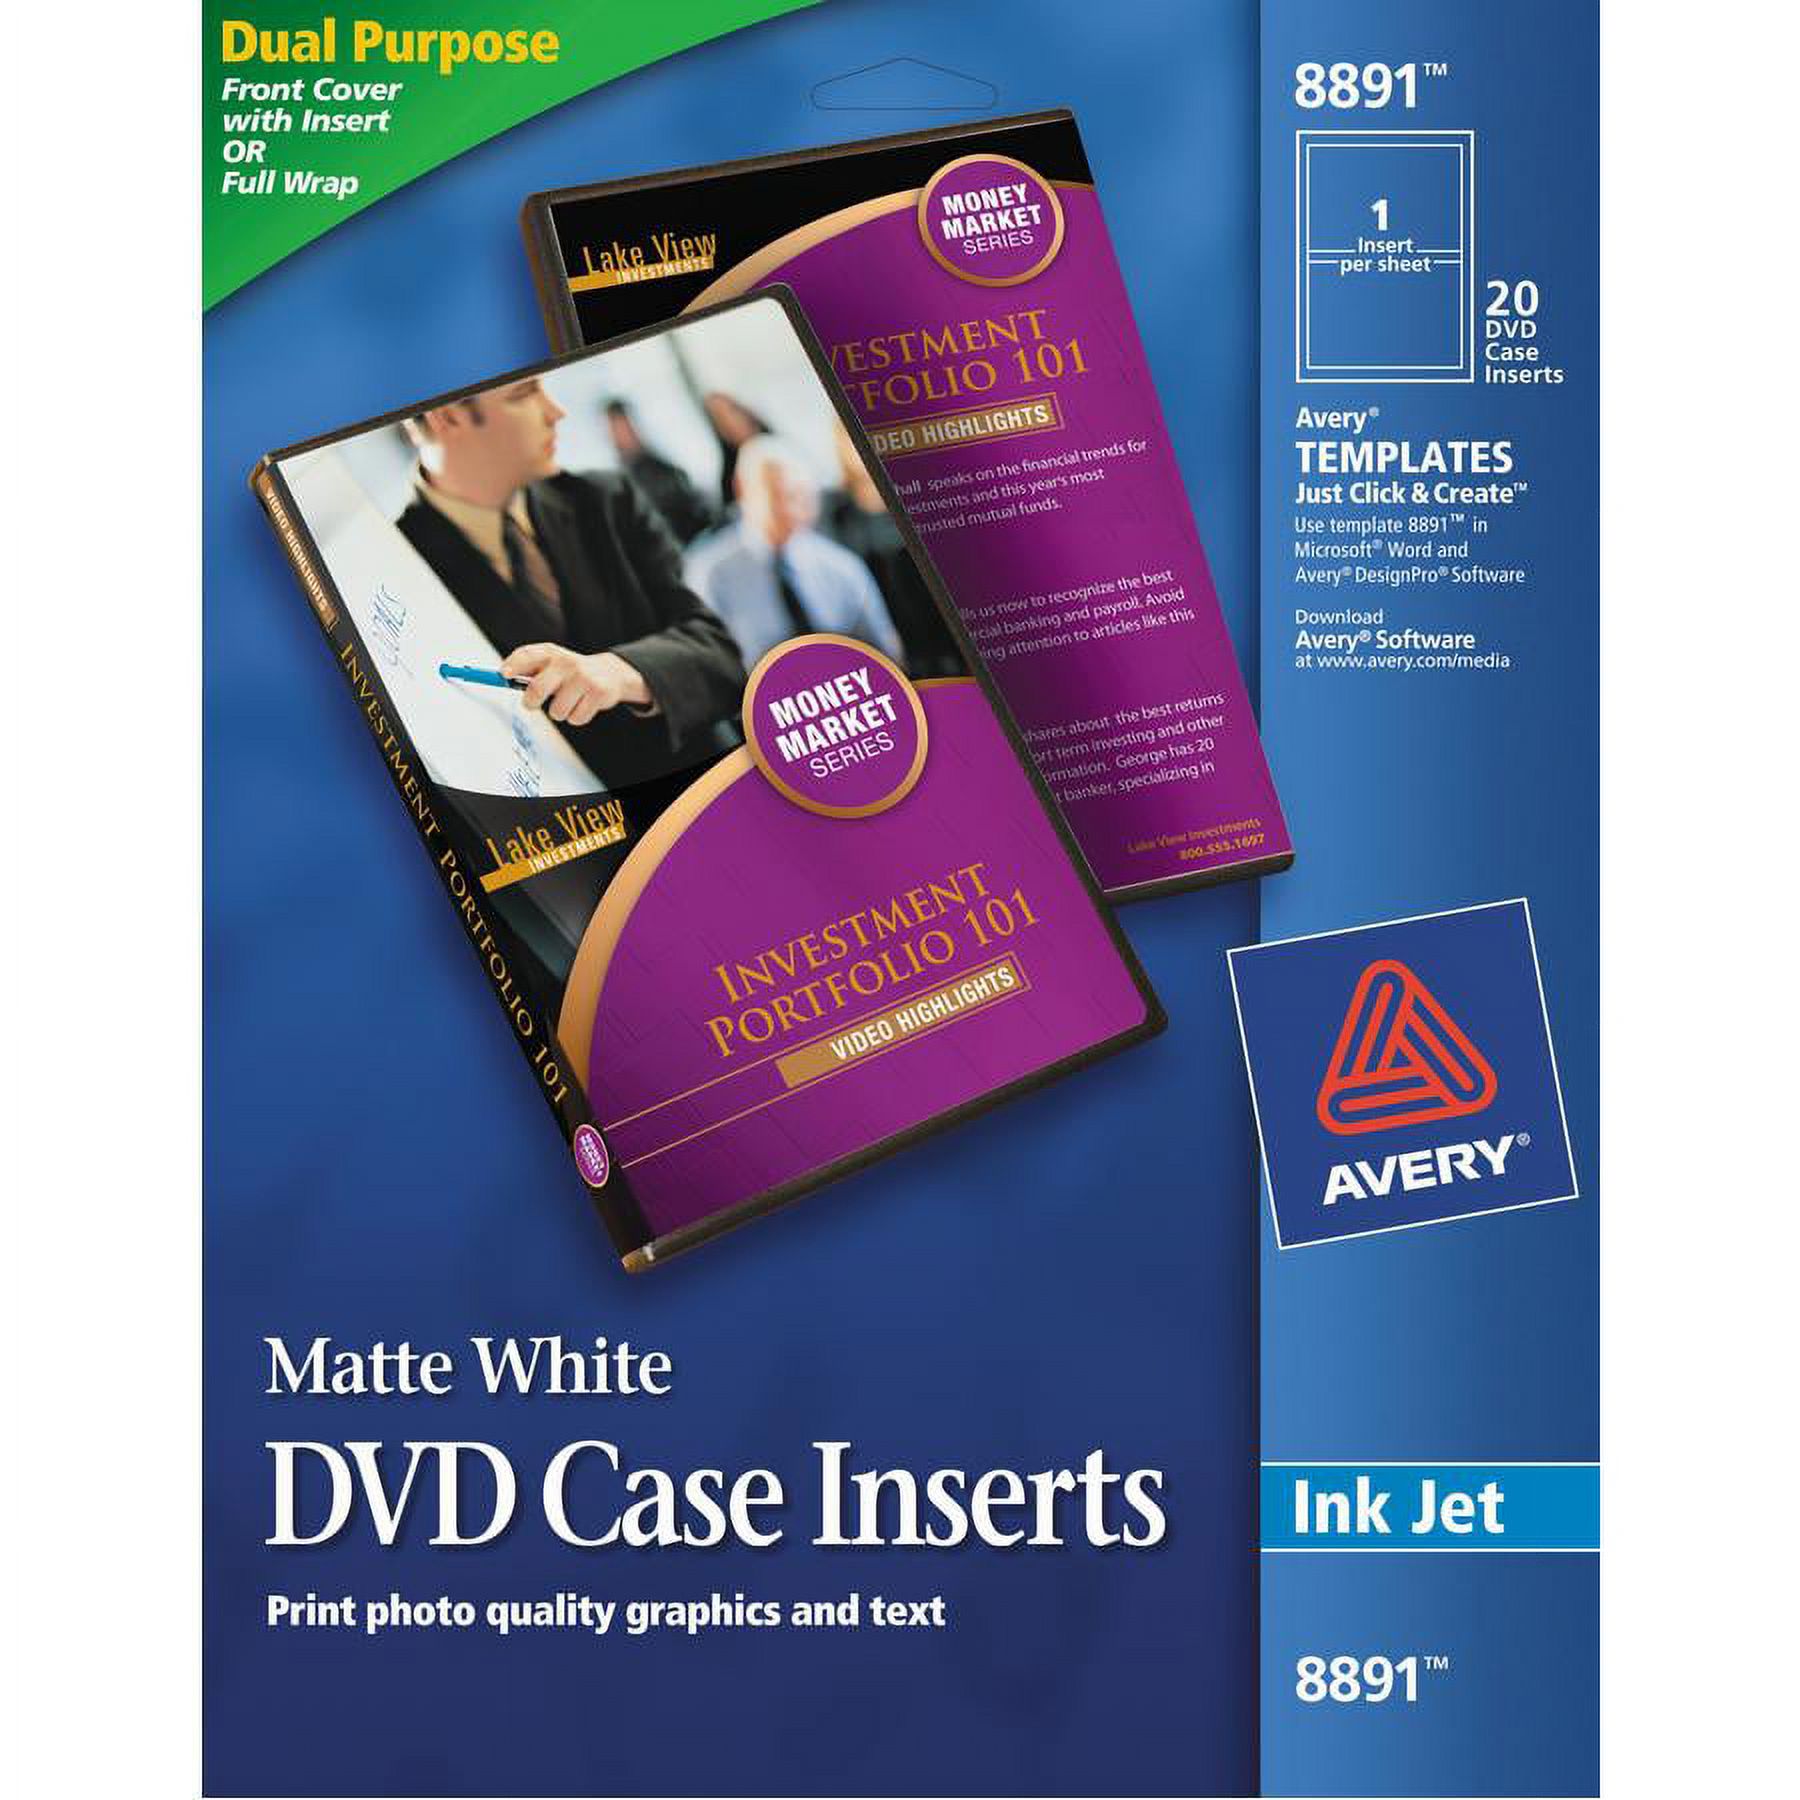 Avery Matte White DVD Case Inserts, 20 Inserts (8891) - image 2 of 3